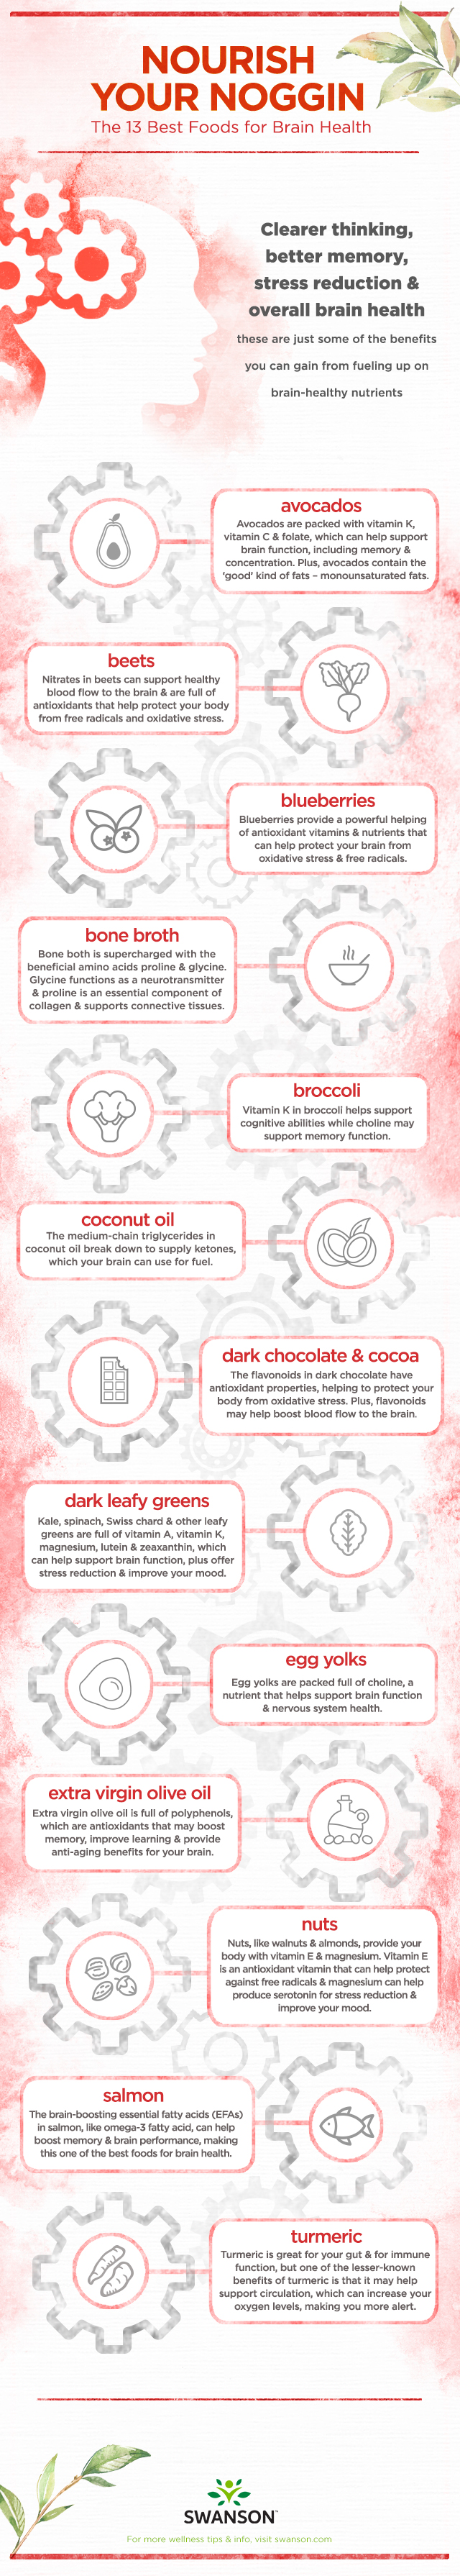 Top Foods for Brain Health - infographic by Swanson Health